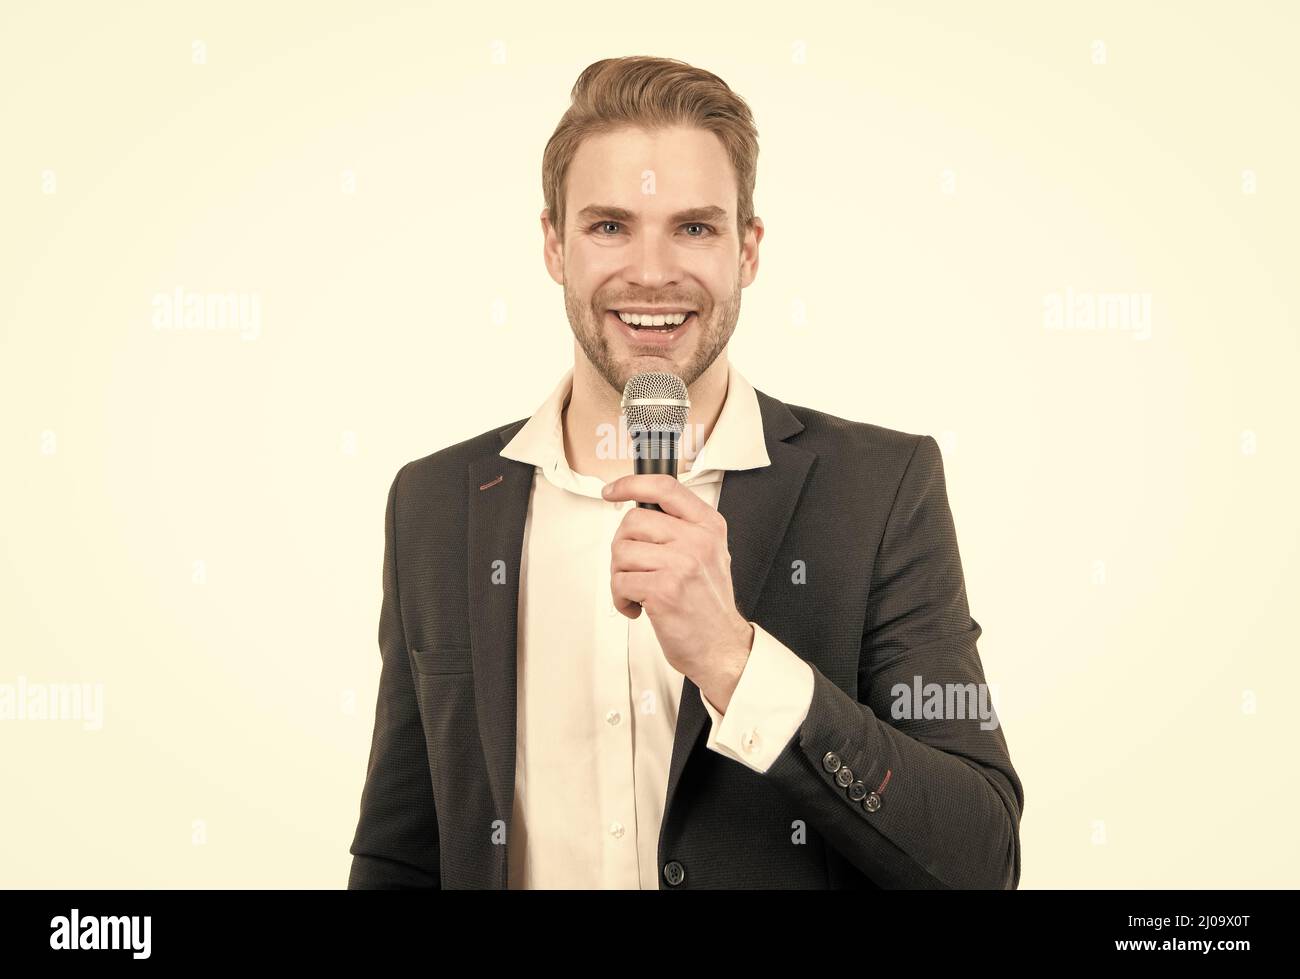 Happy man in business formalwear speak into microphone giving speech isolated on white, conferencier Stock Photo